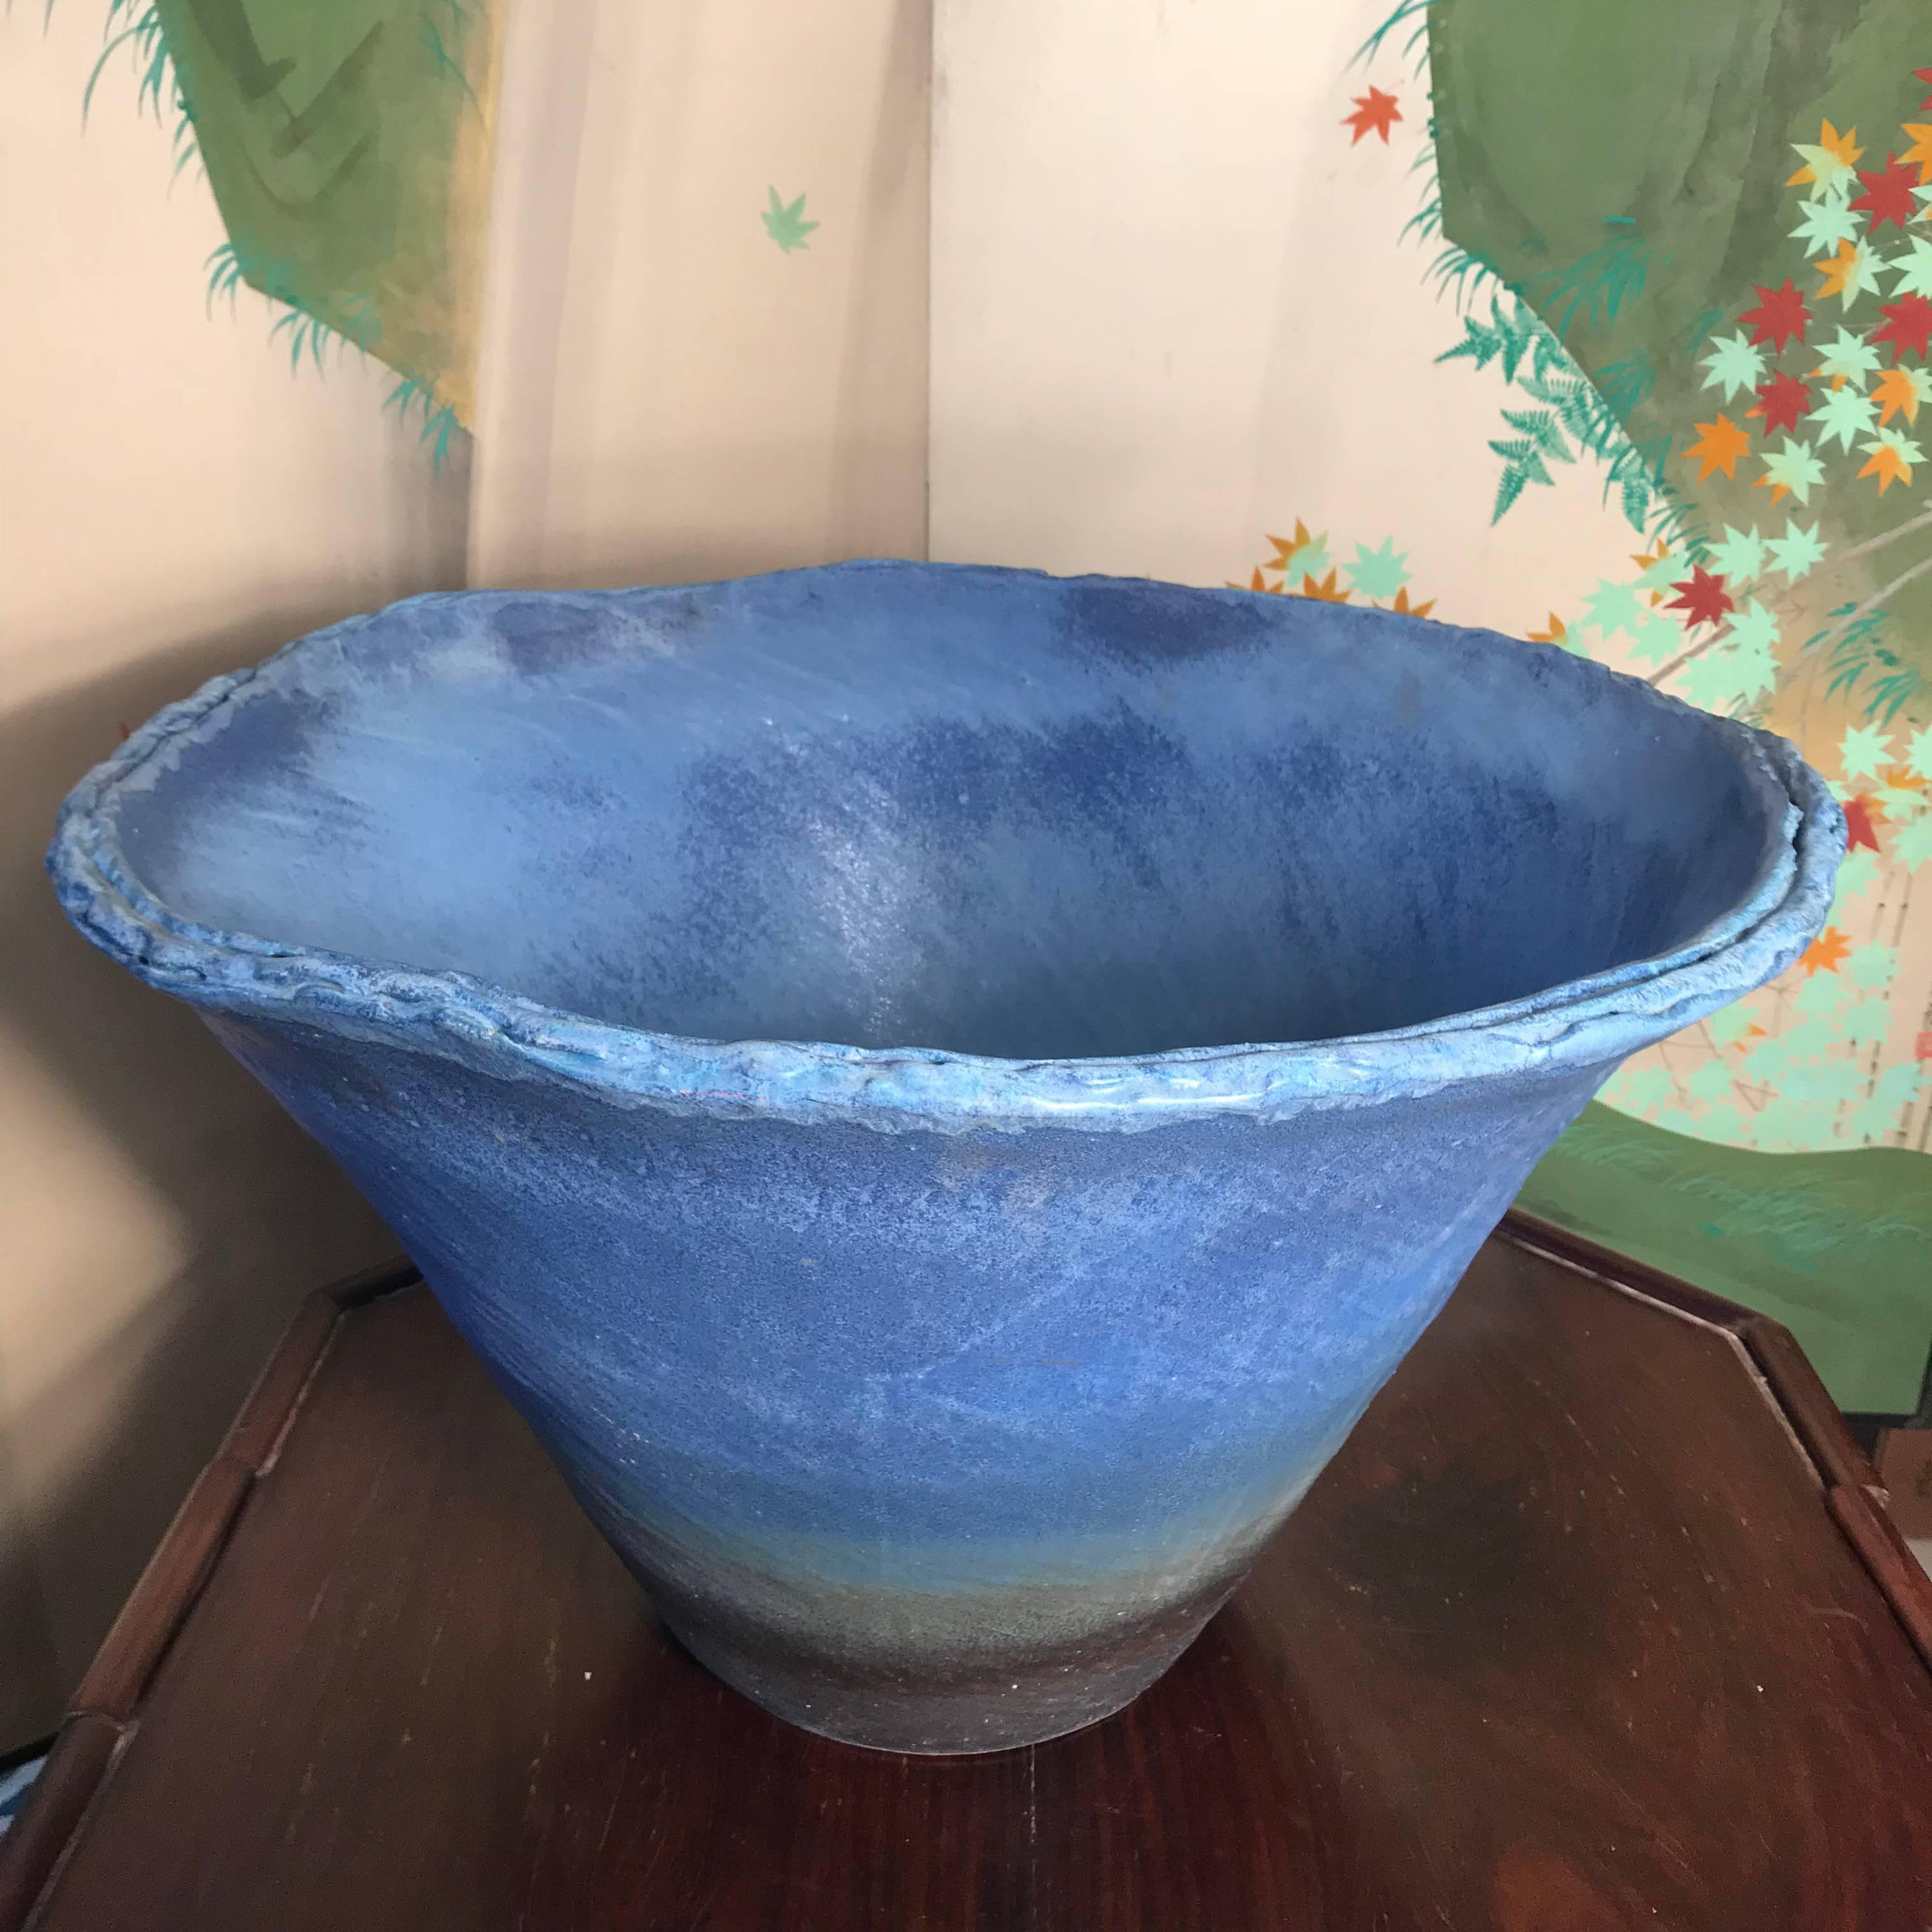 Japan, a big handsome, handmade, and hand glazed one-of-a-kind heavy thick stone ware vessel hand glazed in an attractive brilliant cobalt blue color and from unique Japanese clay called choseki (long life clay). This glazed planter or water vessel